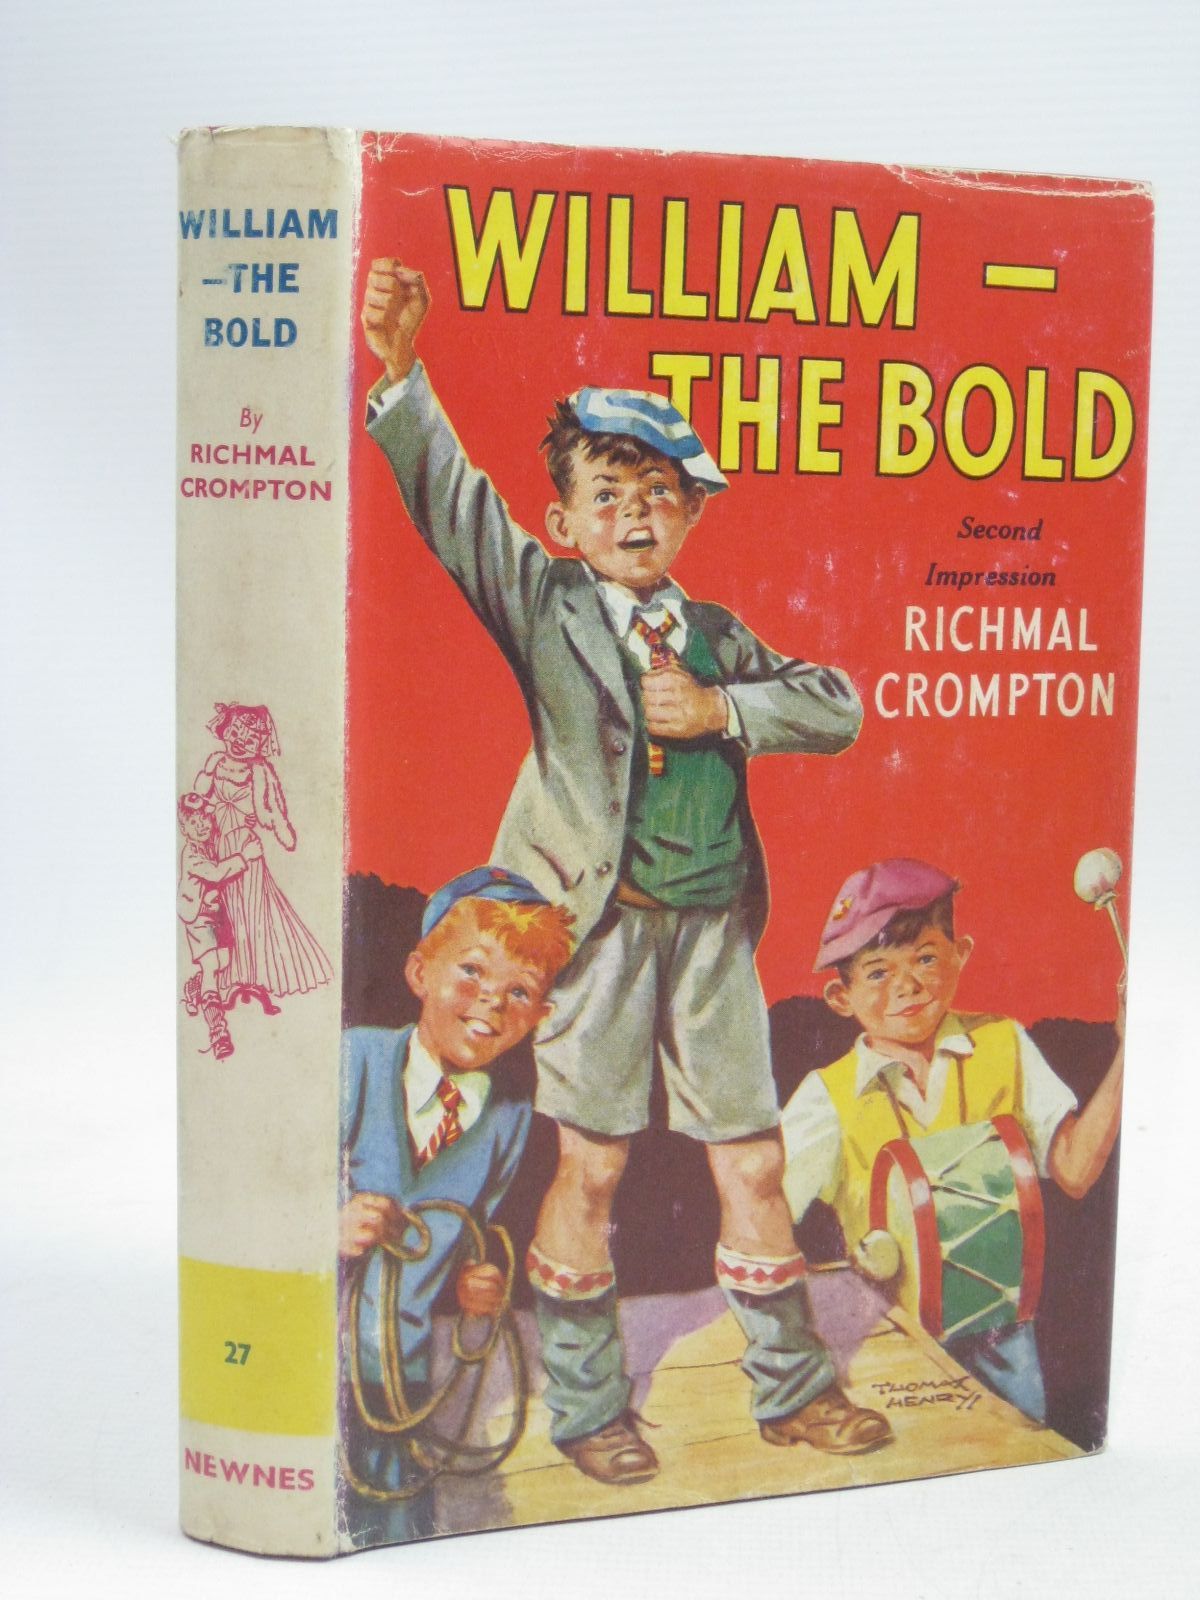 Cover of WILLIAM-THE BOLD by Richmal Crompton